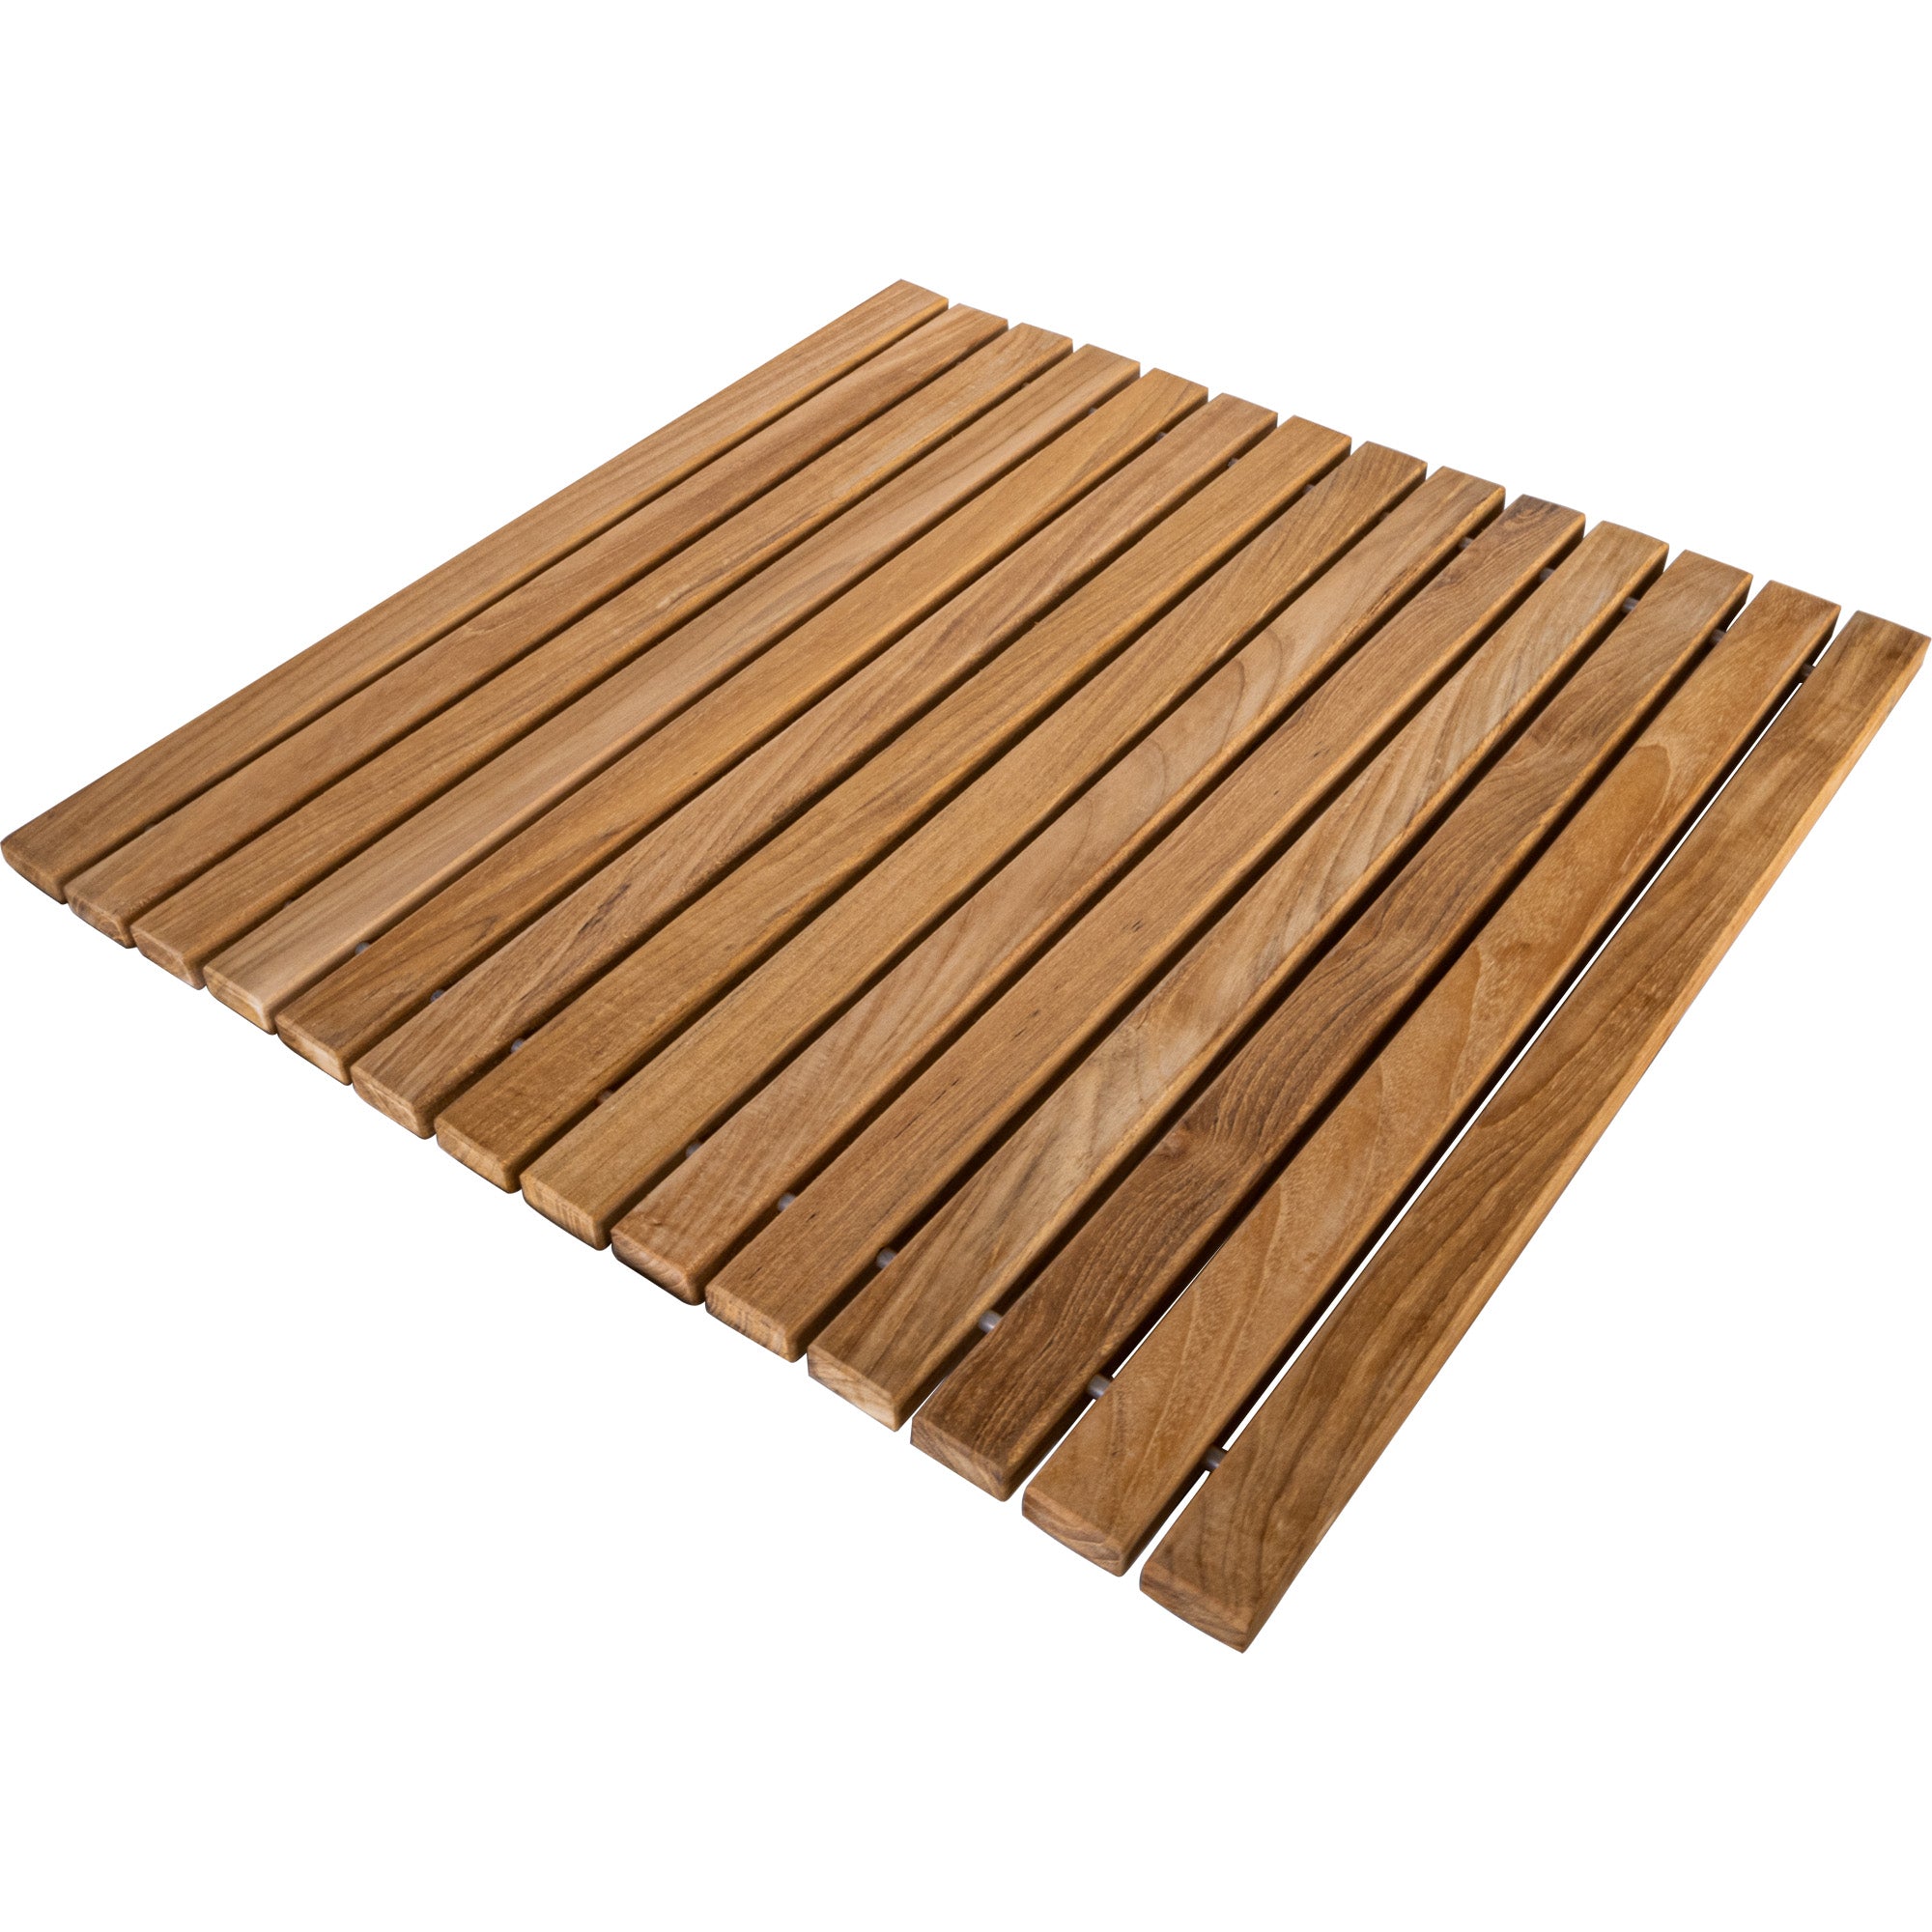 Nordic Style Natural Teak Shower and Bath String Mat 19.6′′ x 19.6′′ - Beige